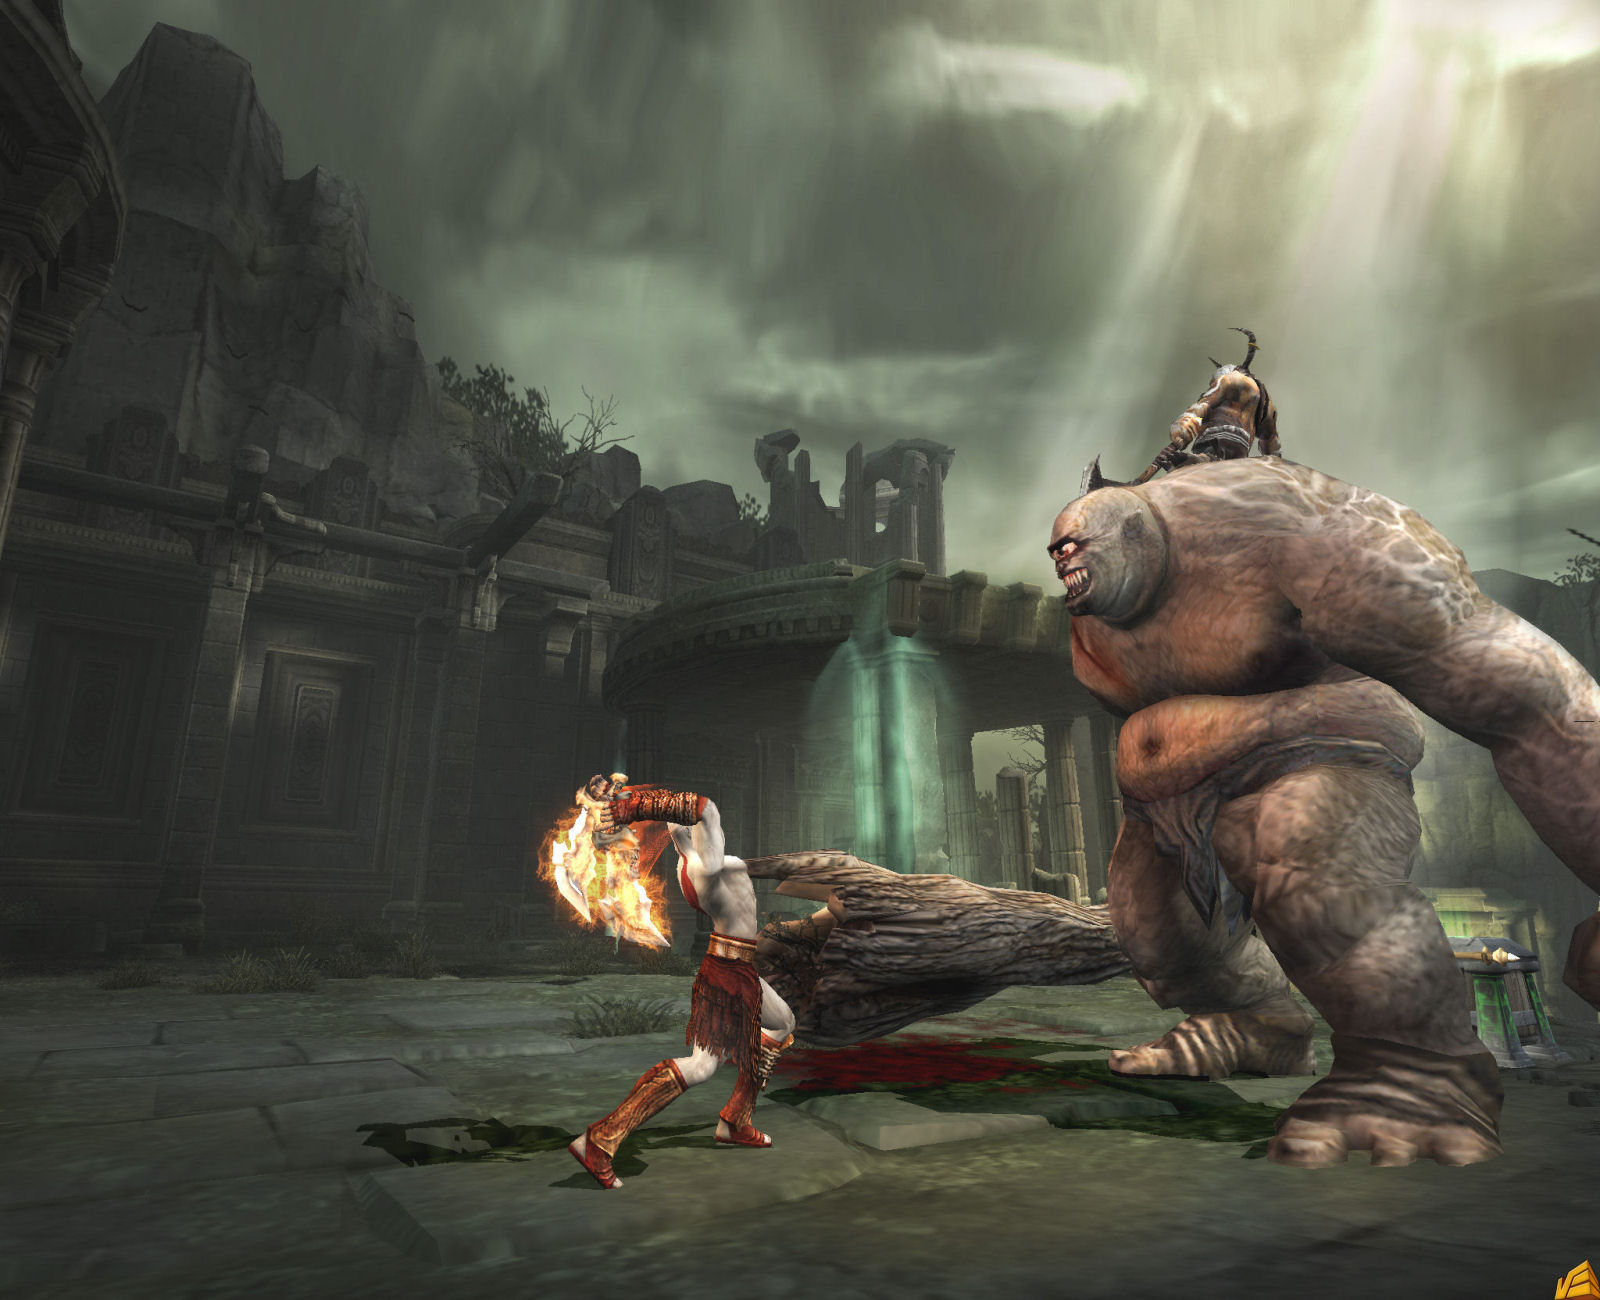 God of war 2 ppsspp download for pc free